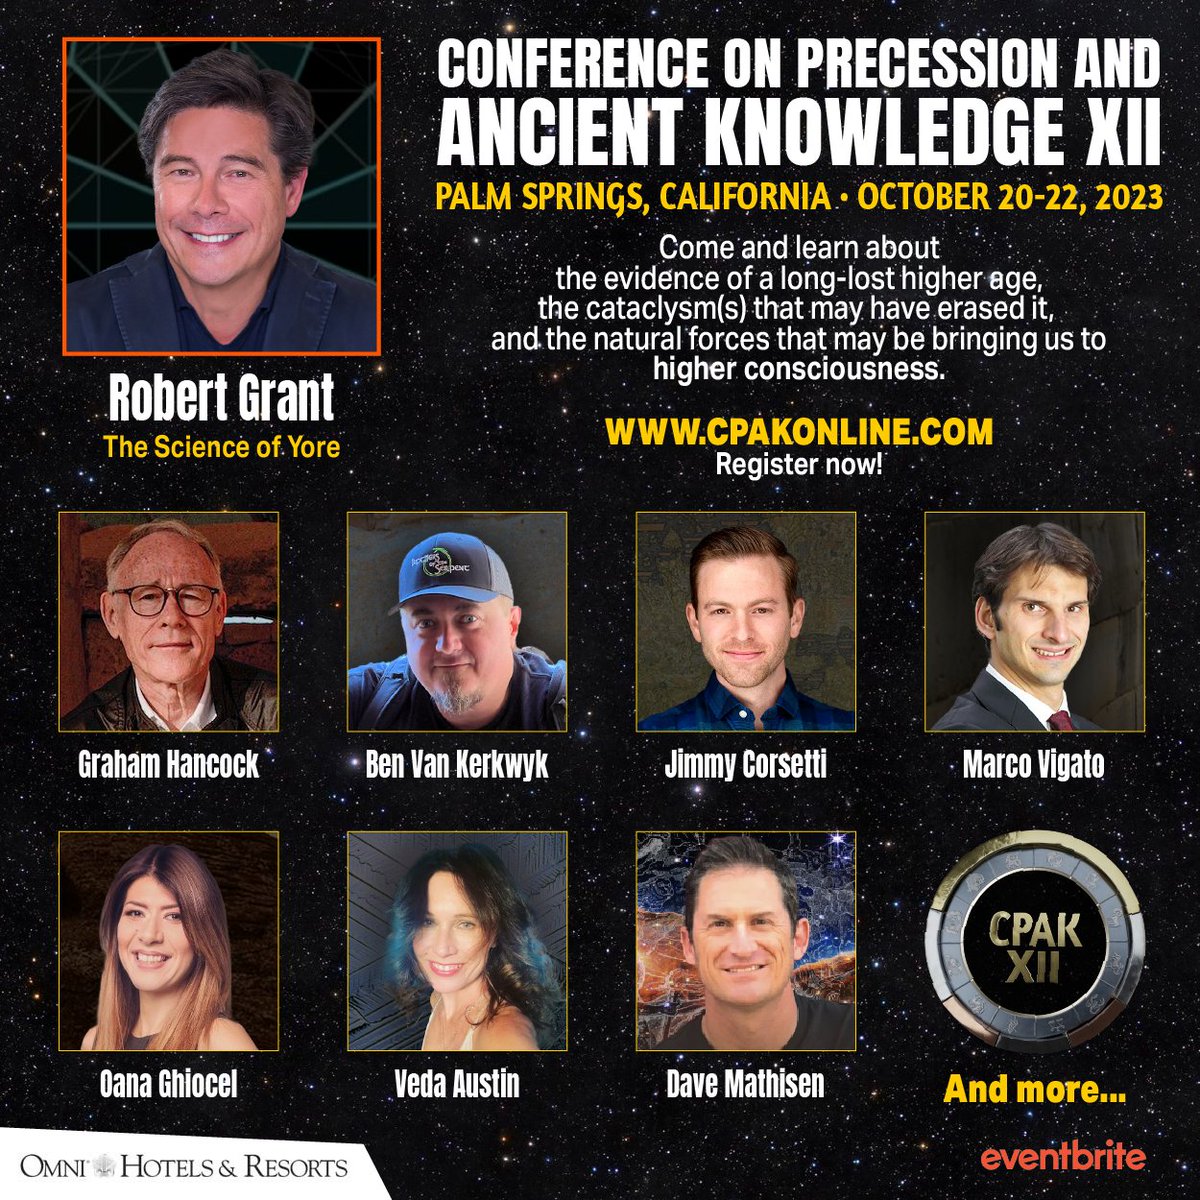 Polymath and discrete geometric analyst, Robert Edward Grant @Robert_E_Grant_, is one of the featured presenters at this year's Conference on Precession & Ancient Knowledge! cpakonline.com/robert-edward-…

TOPIC: Advanced Science of Yore

#CPAK #RobertEdwardGrant